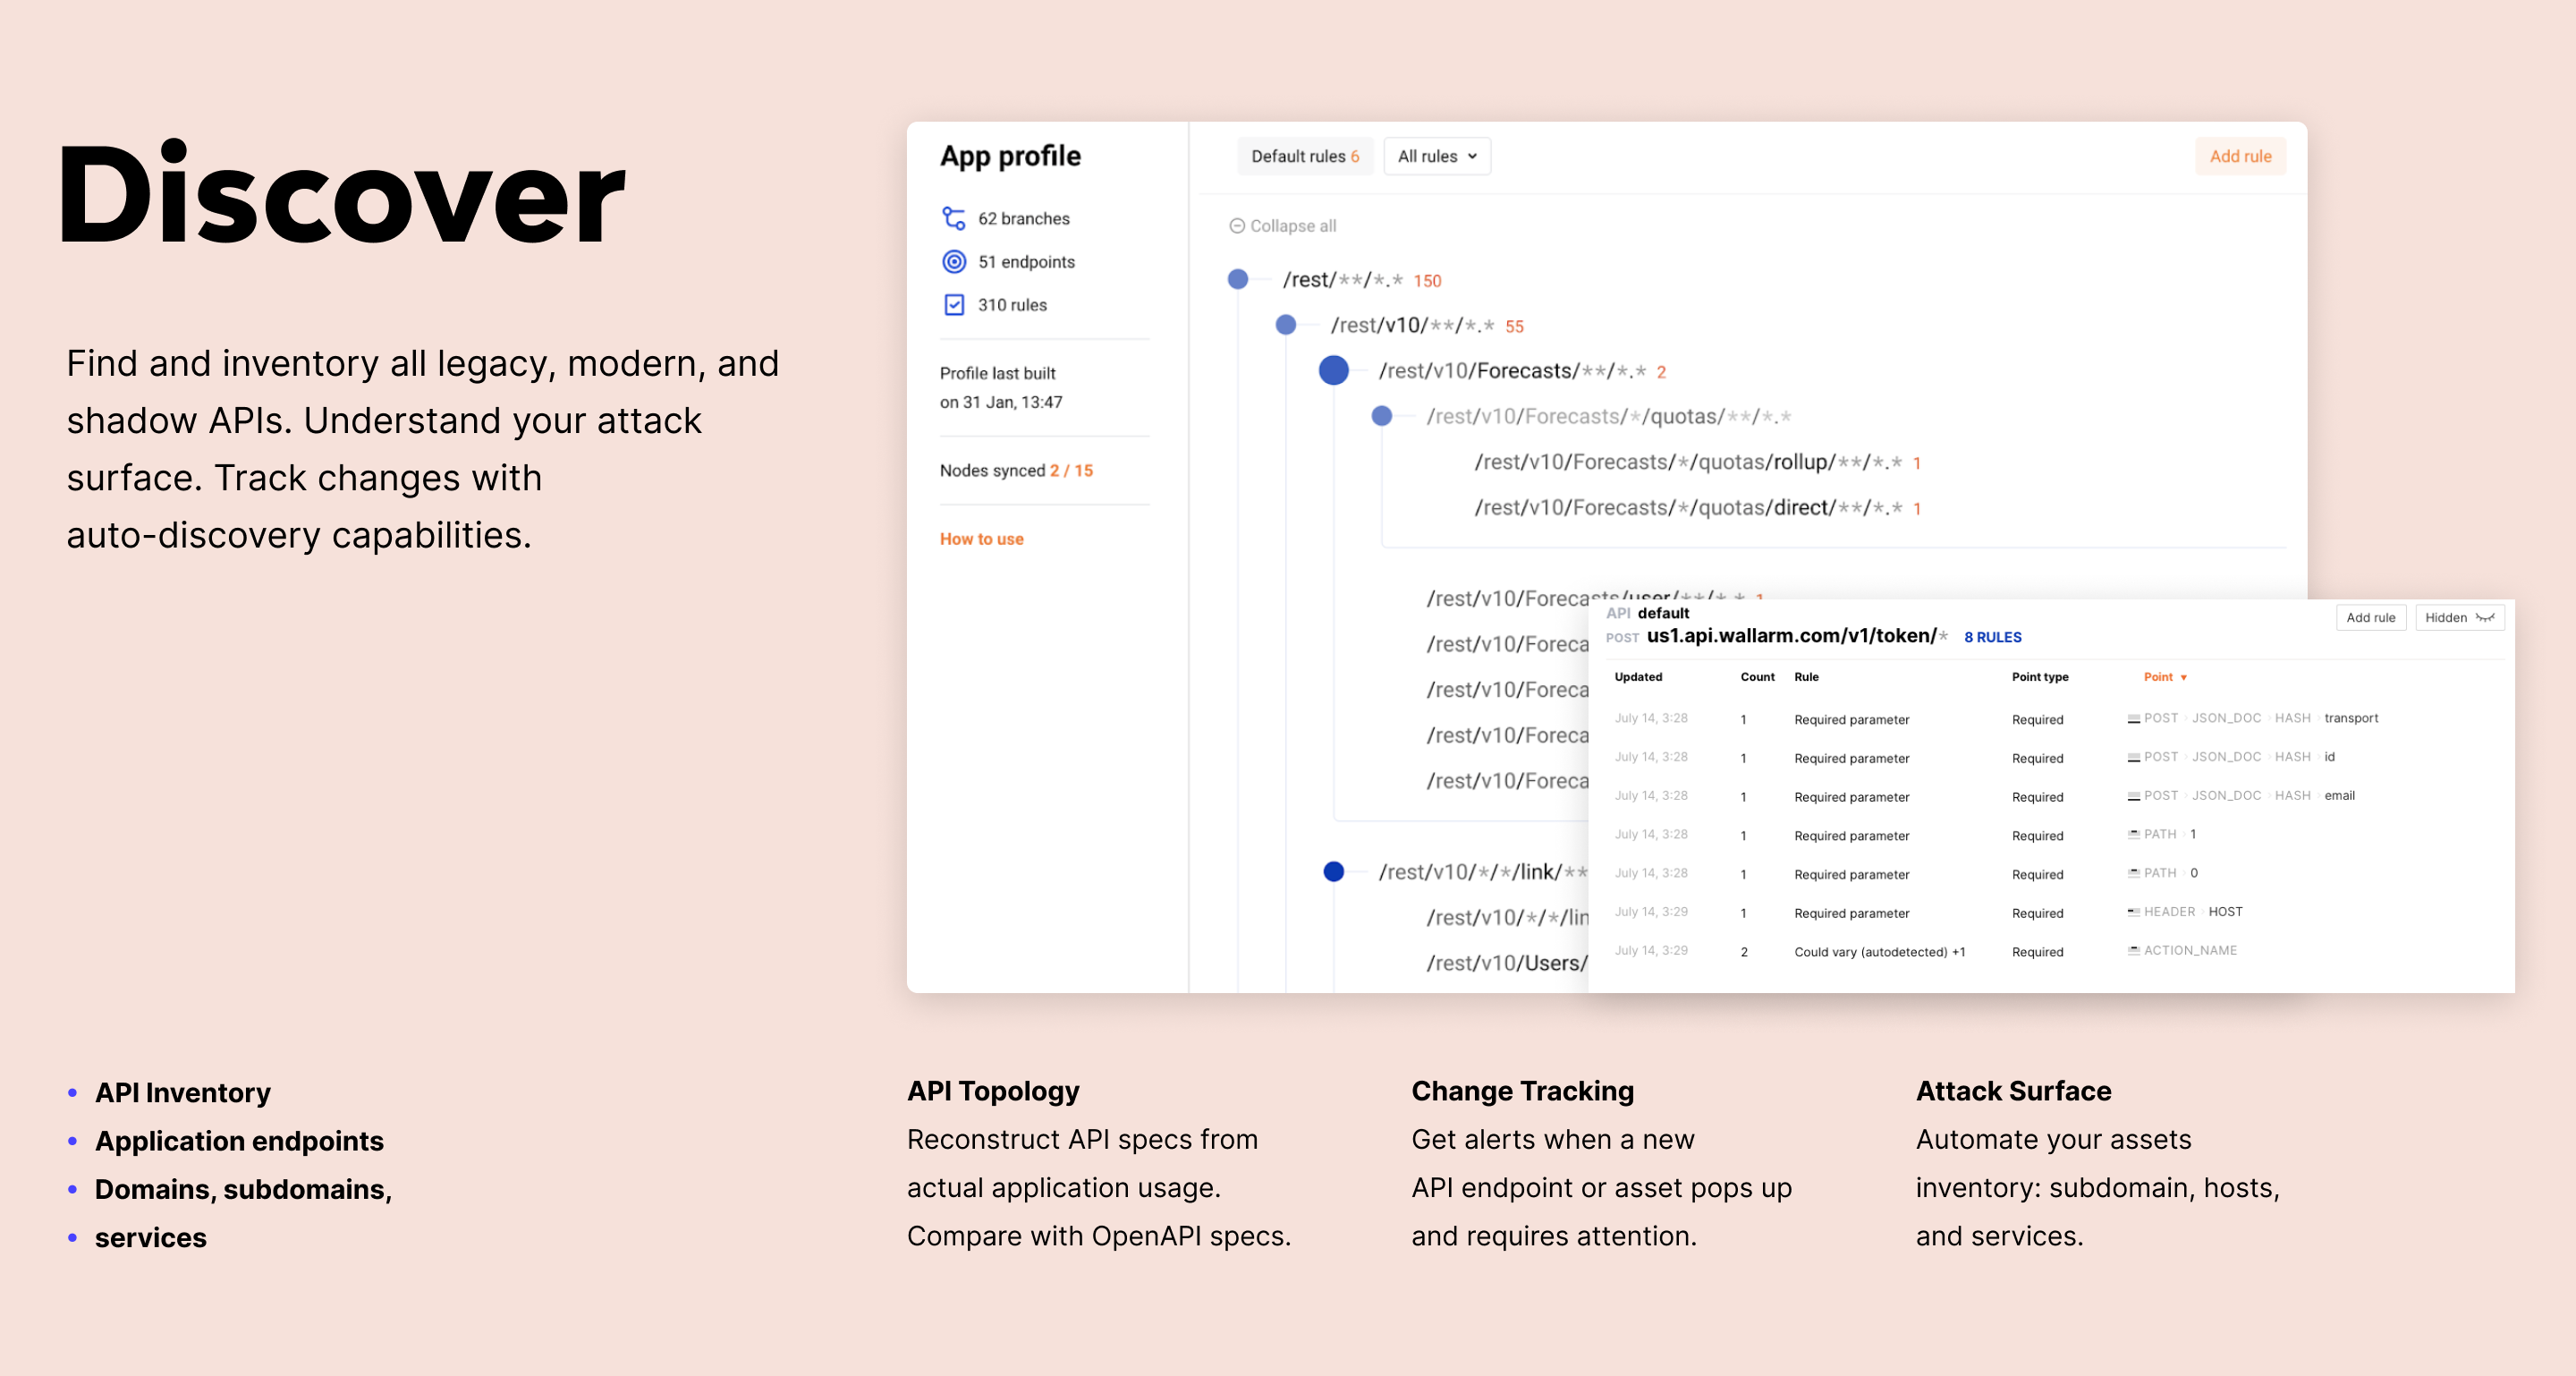 Discover. Find and inventory all legacy, modern, and shadow APIs.